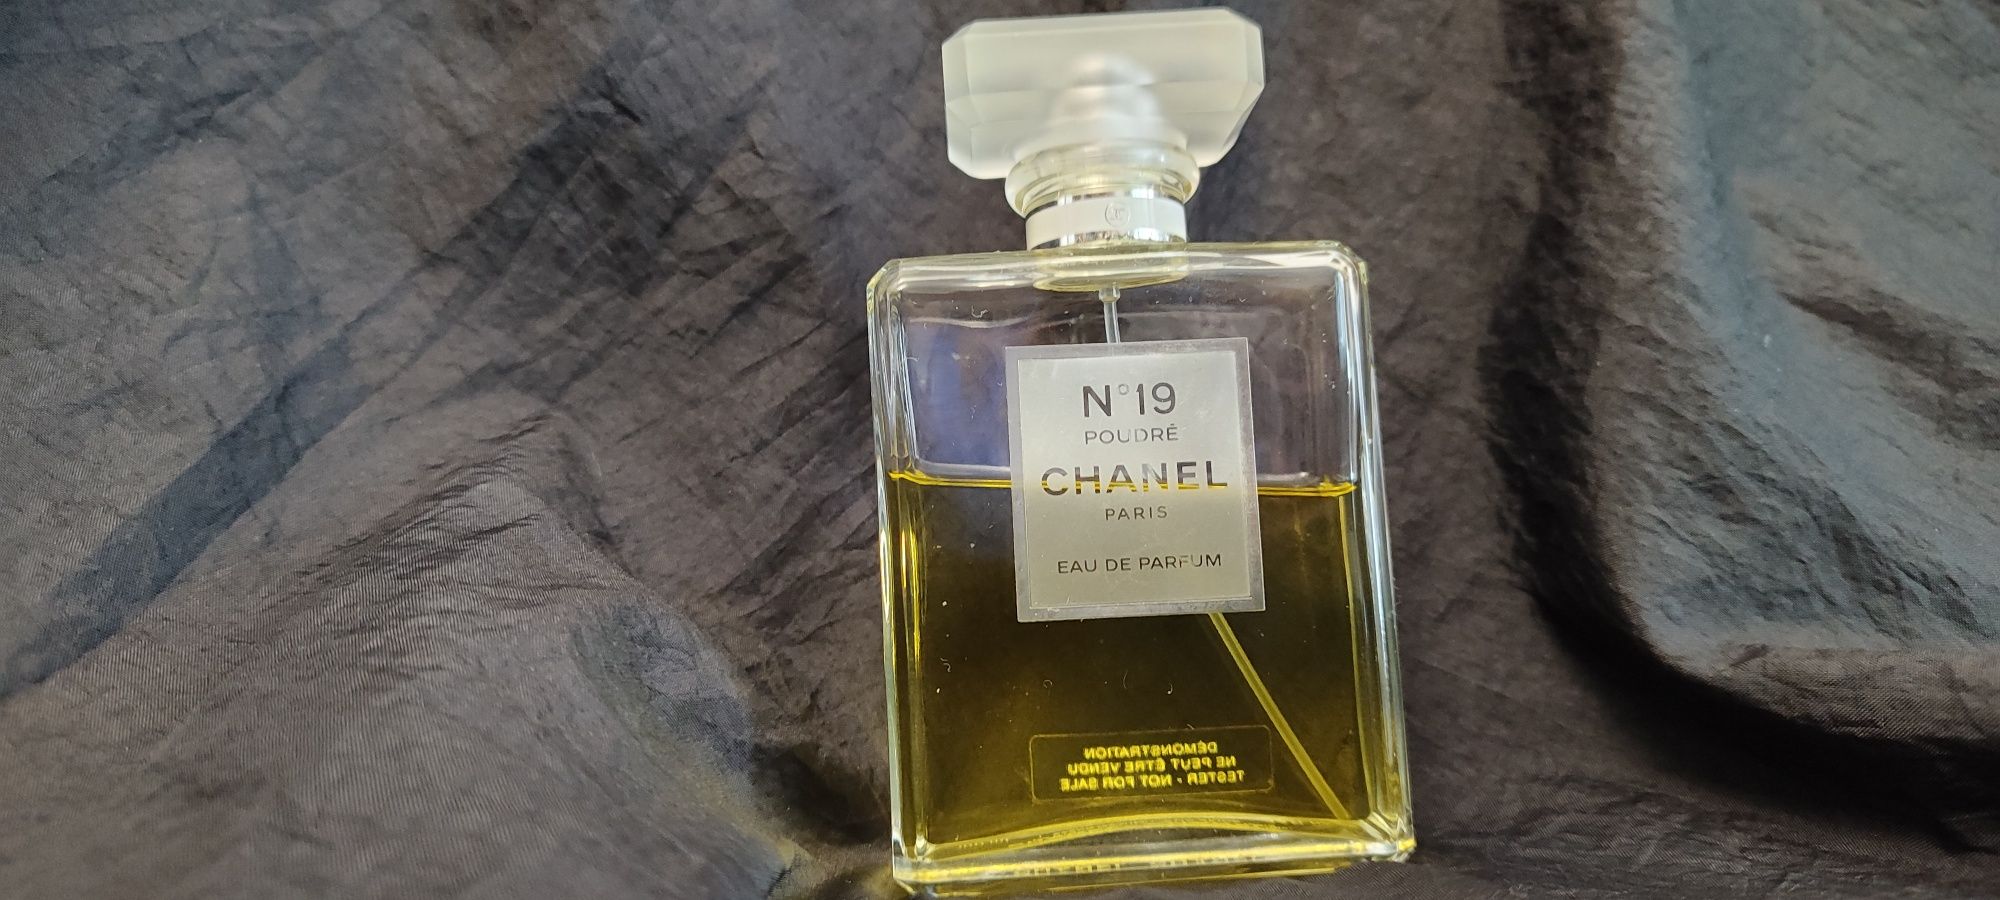 Chanel N'19 Poudre парфюмерная вода